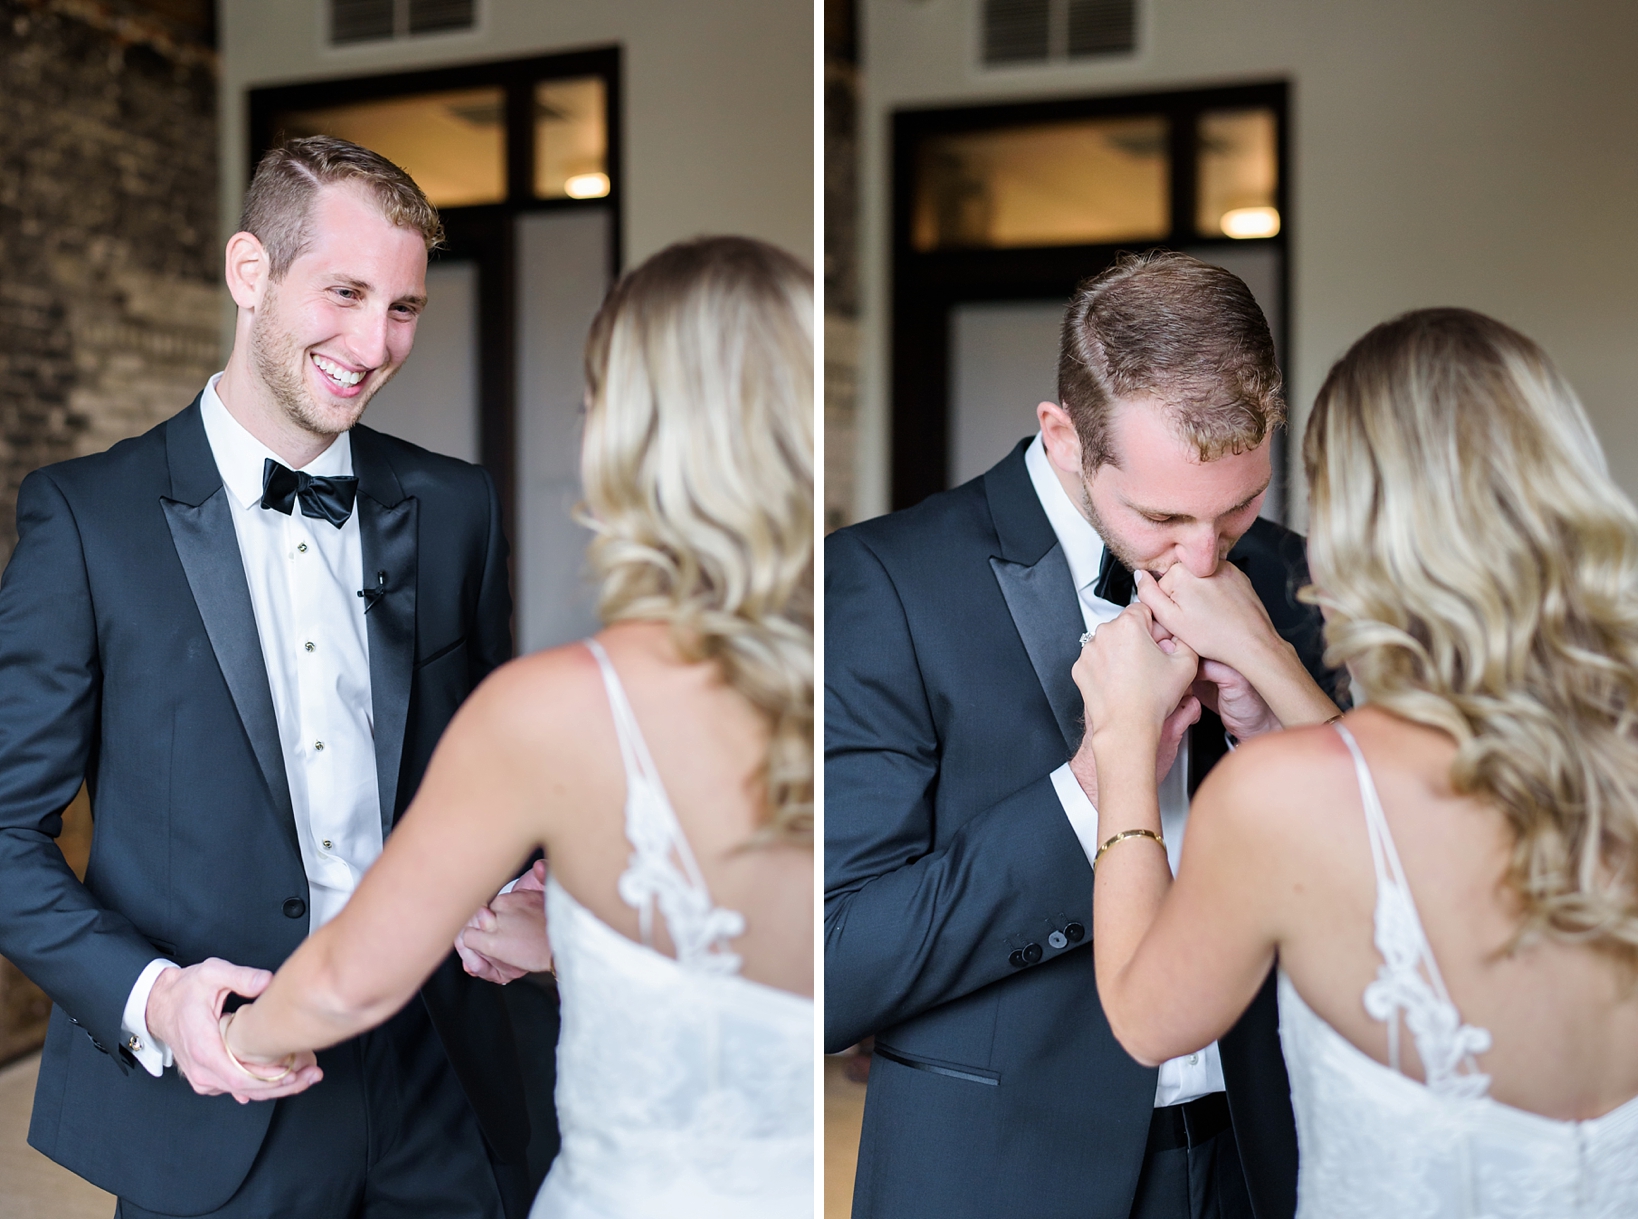 Groom sees his bride for the first time and kisses her hand